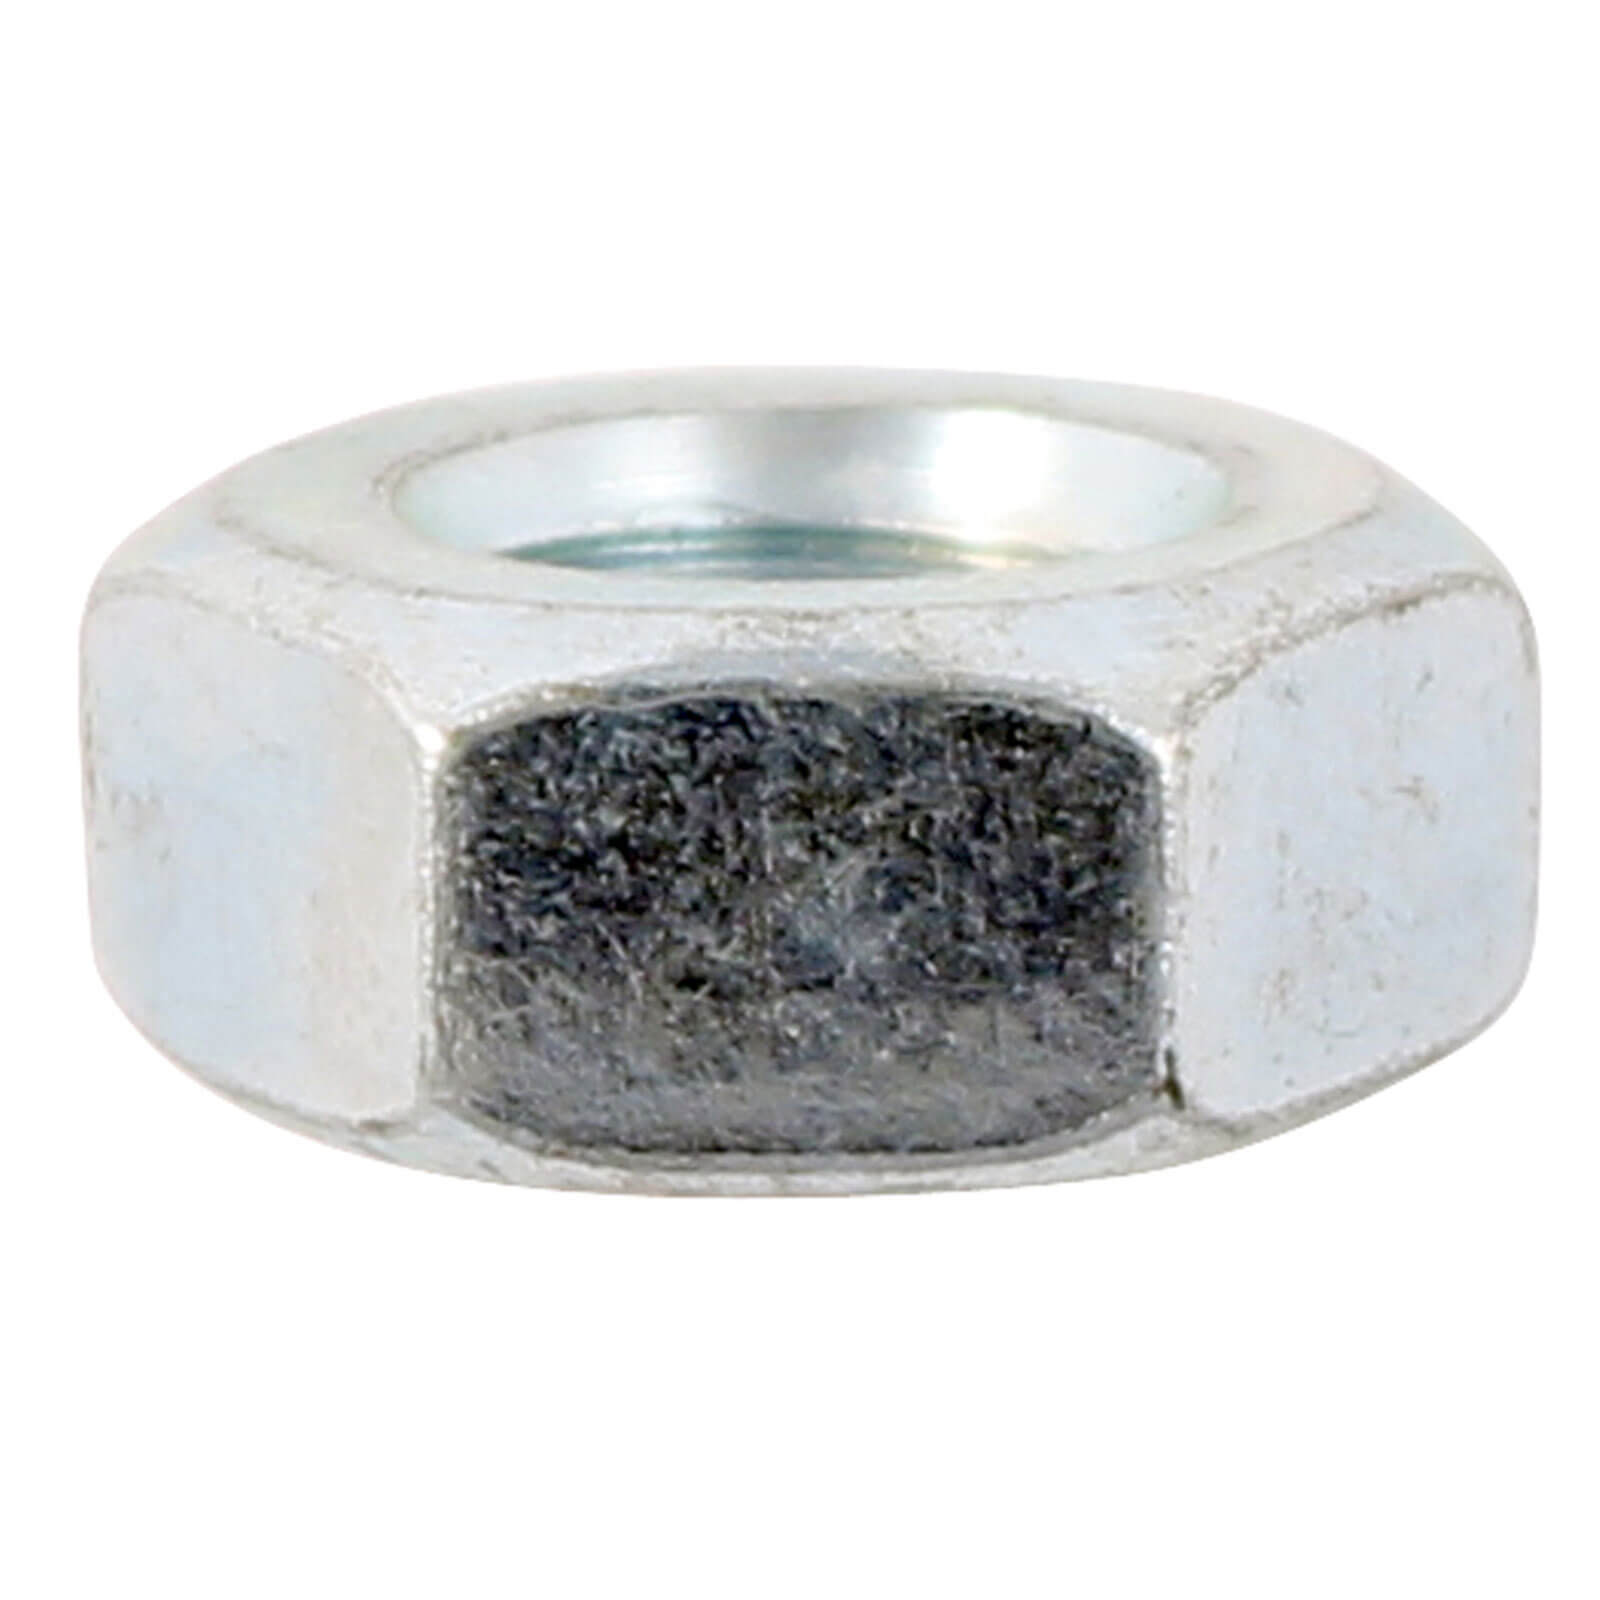 Image of Sirius A4 316 Hex Full Nut Stainless Steel M8